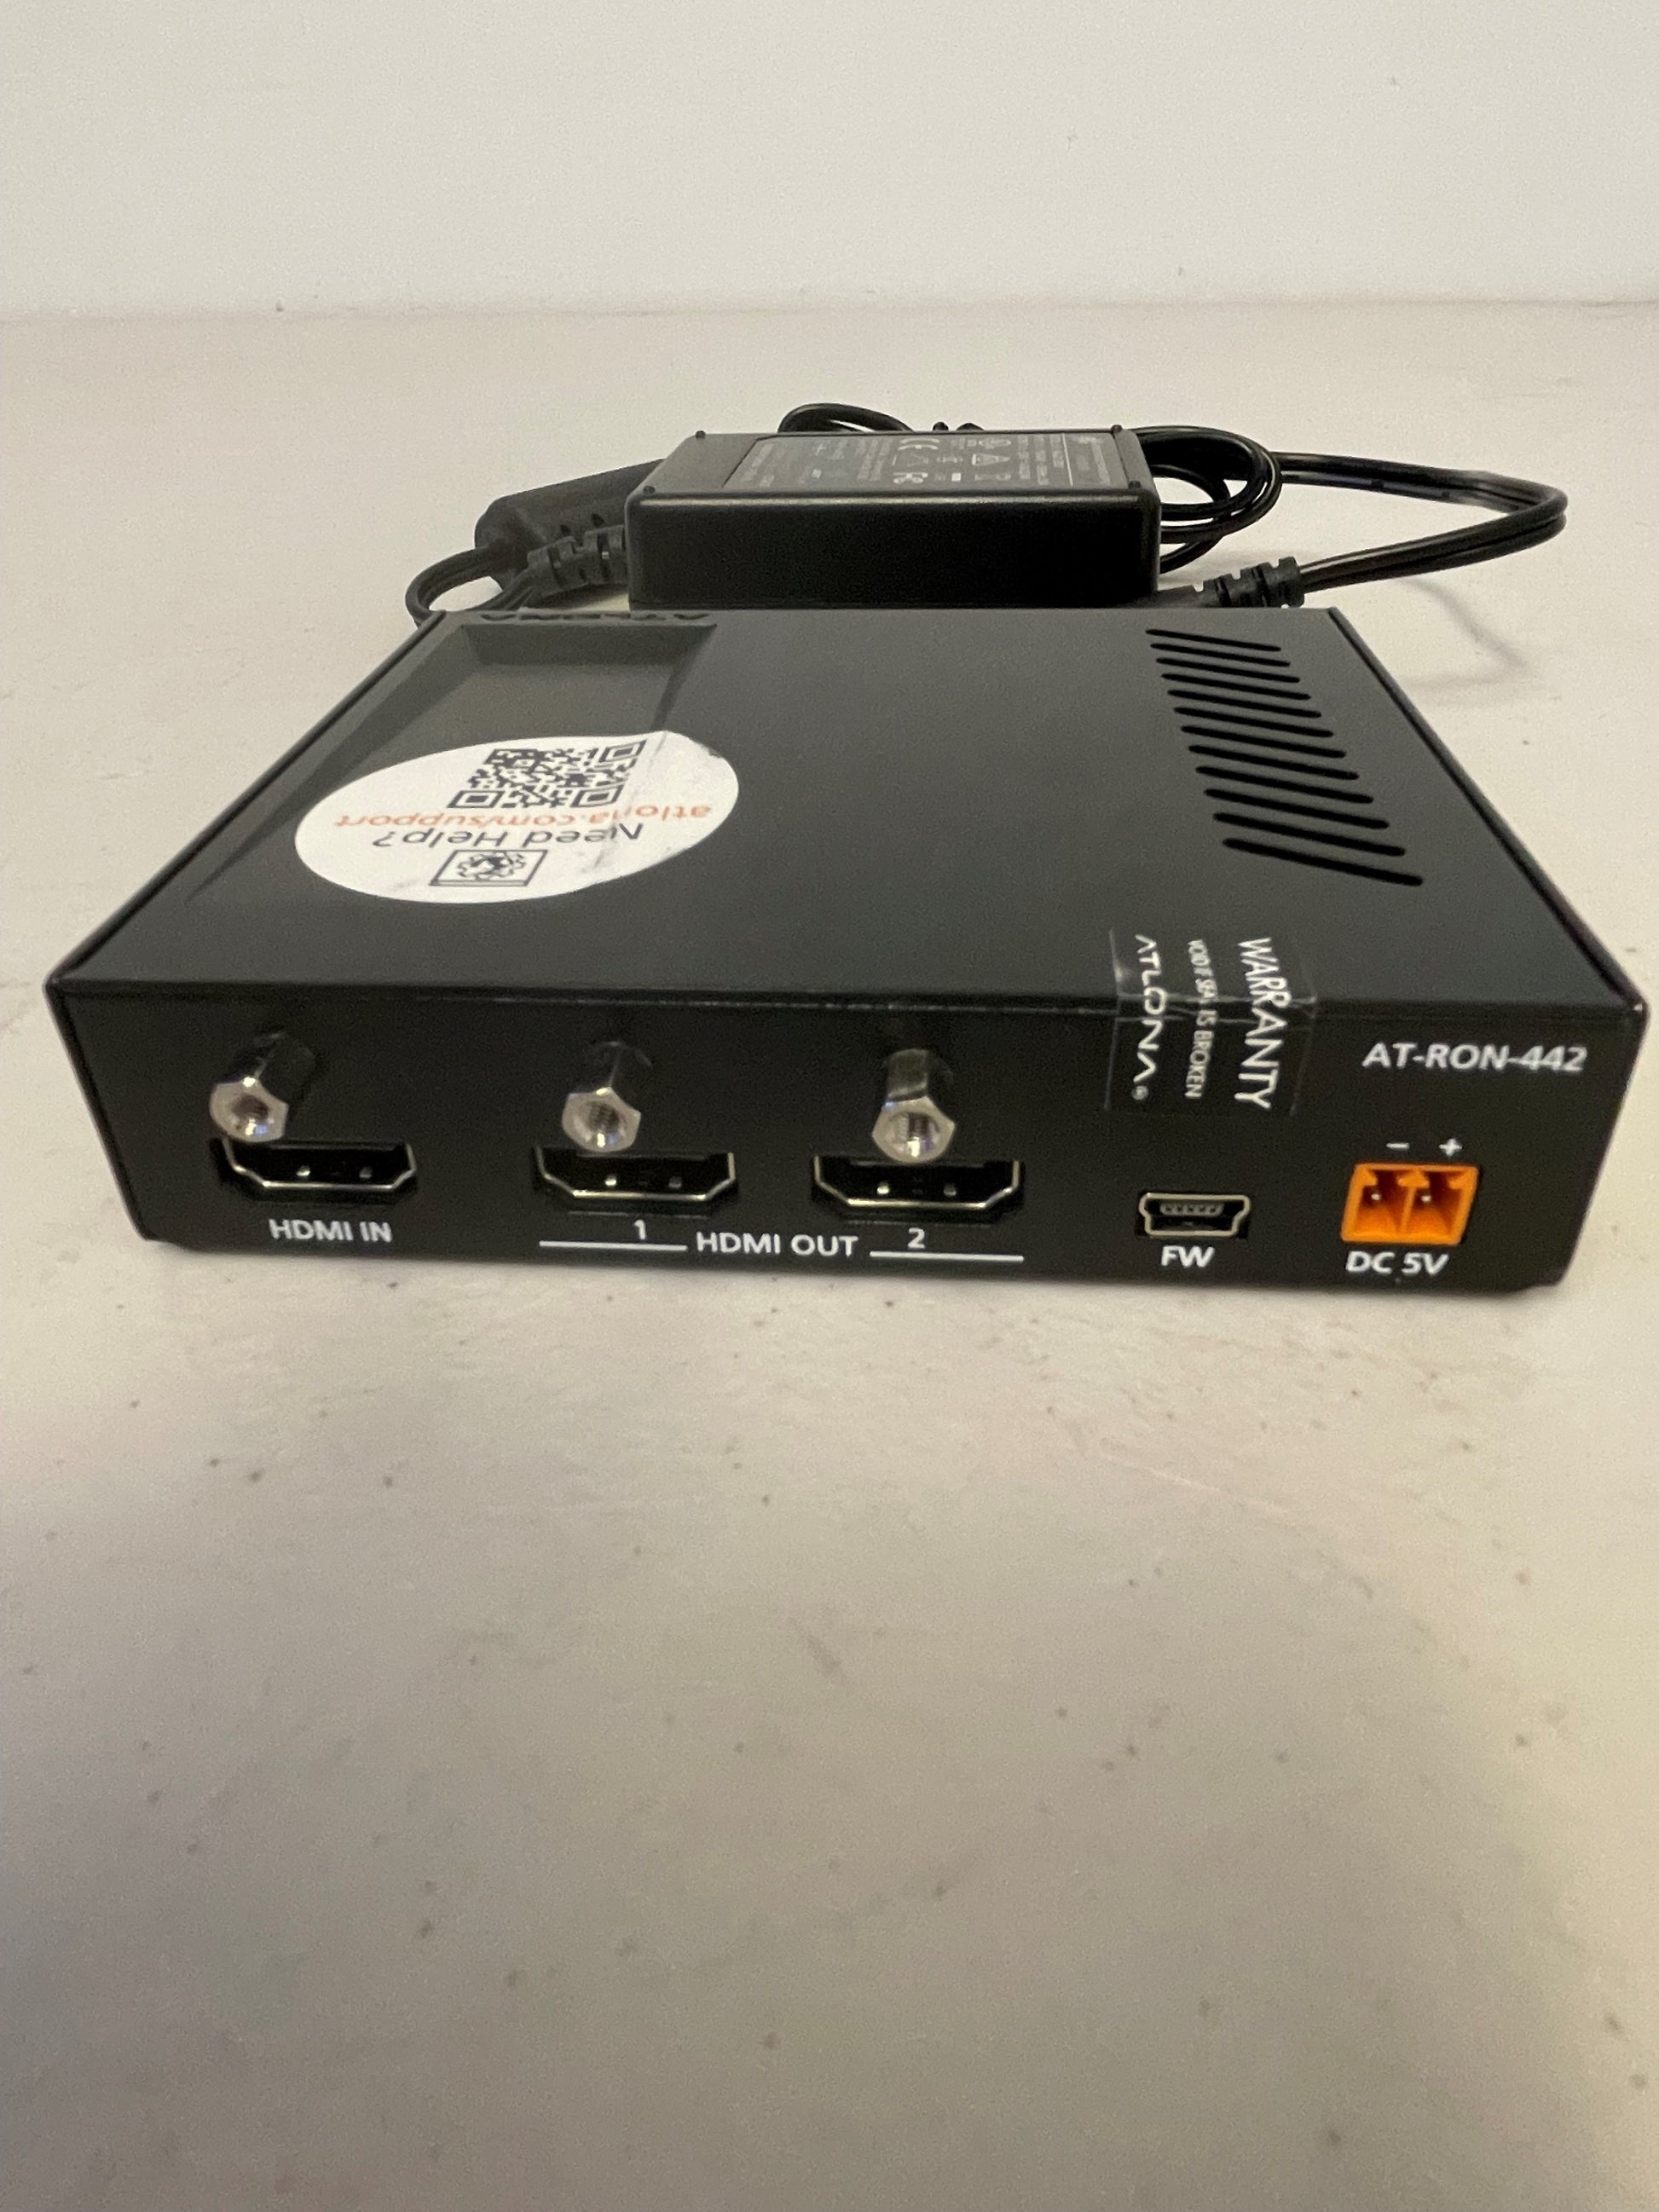 Used Atlona RONDO AT-RON-442 4K 2-Output DA for Sale. We Sell Professional Audio Equipment. Audio Systems, Amplifiers, Consoles, Mixers, Electronics, Entertainment and Live Sound.